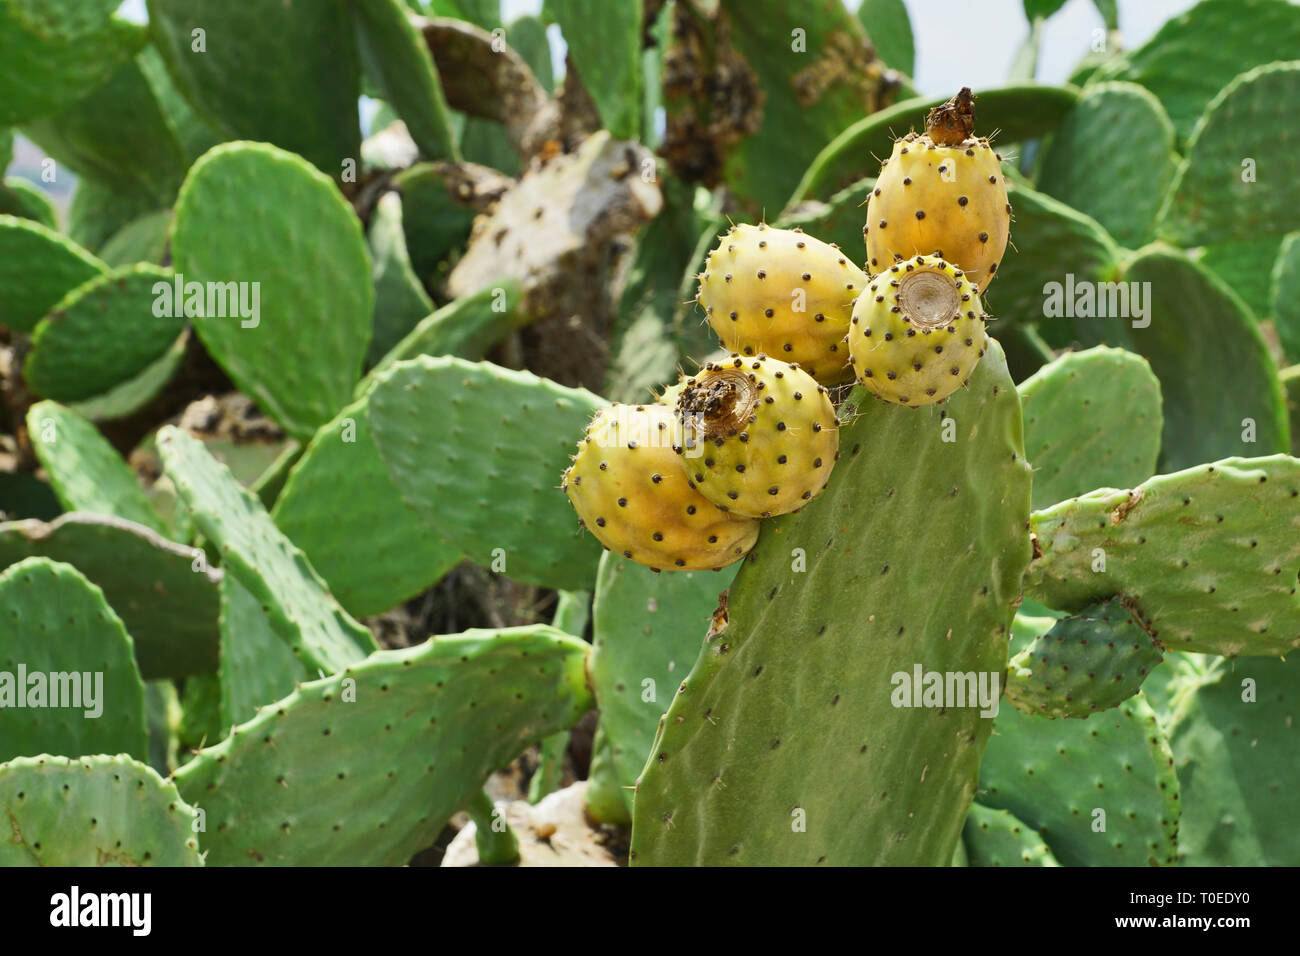 Prickly pear cactus with yellow fruits in Malta Stock Photo